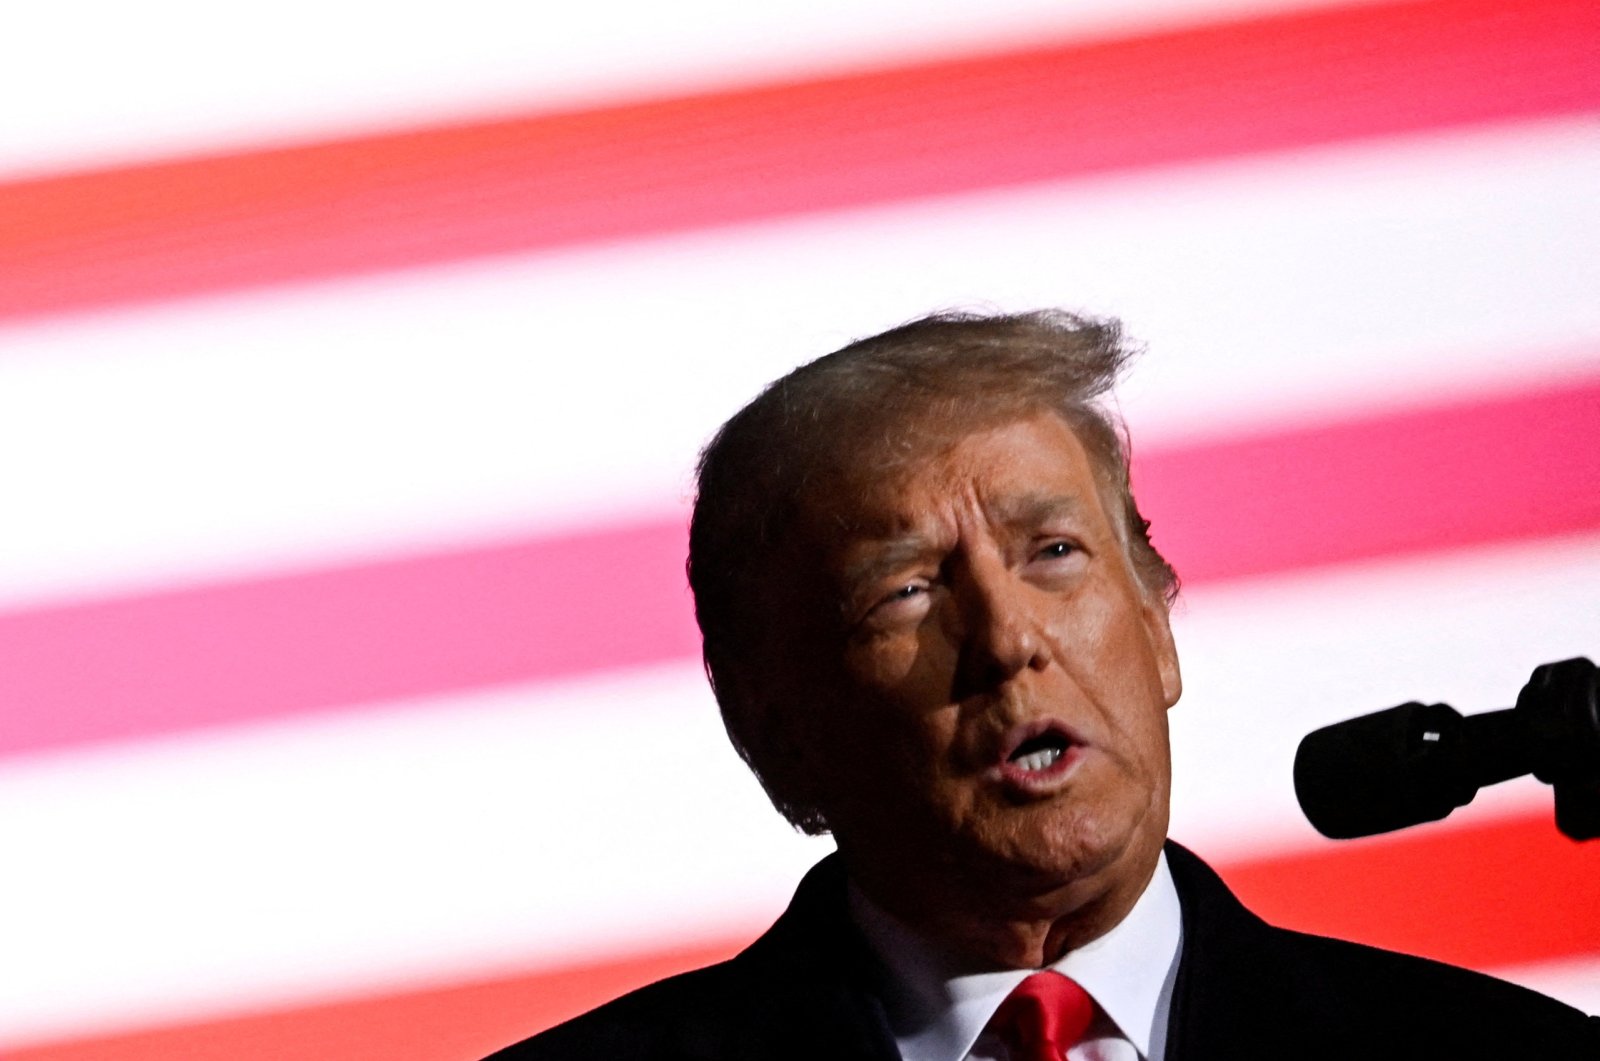 Former U.S. President Donald Trump speaks at a rally to support Republican candidates ahead of midterm elections, Dayton, Ohio, U.S., Nov. 7, 2022. (Reuters Photo)